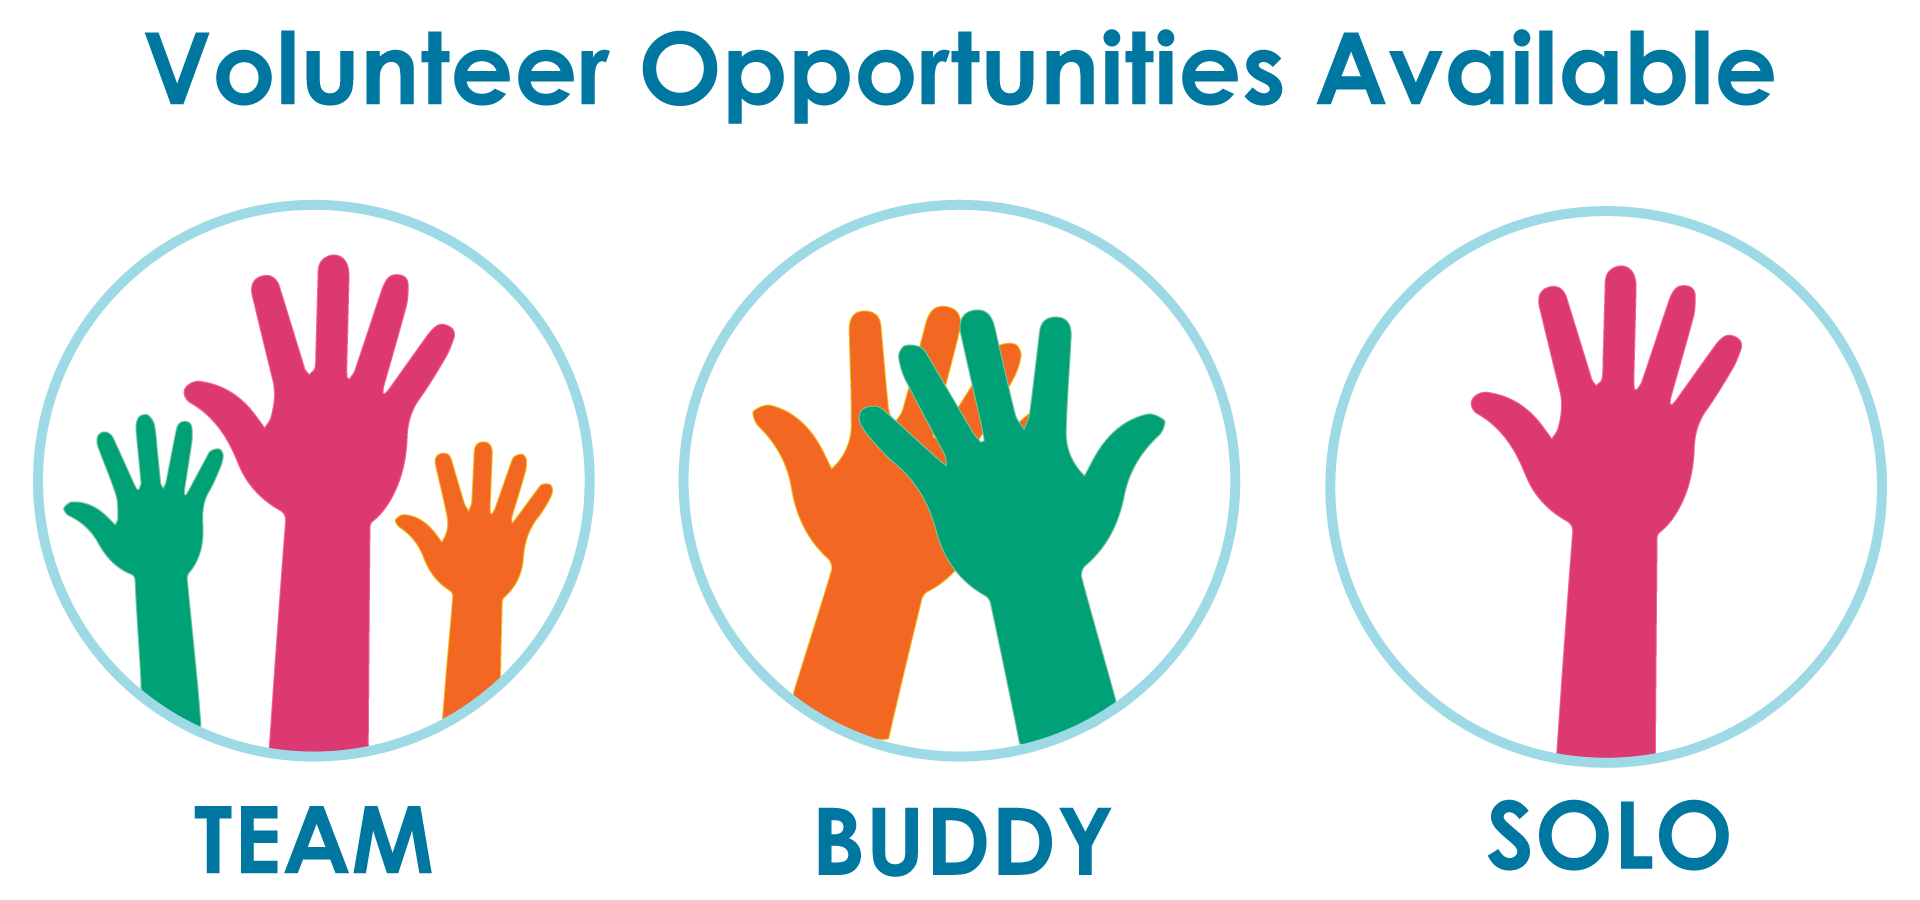 Volunteer Opportunities available at Wilder Foundation as a team, with a buddy or solo 